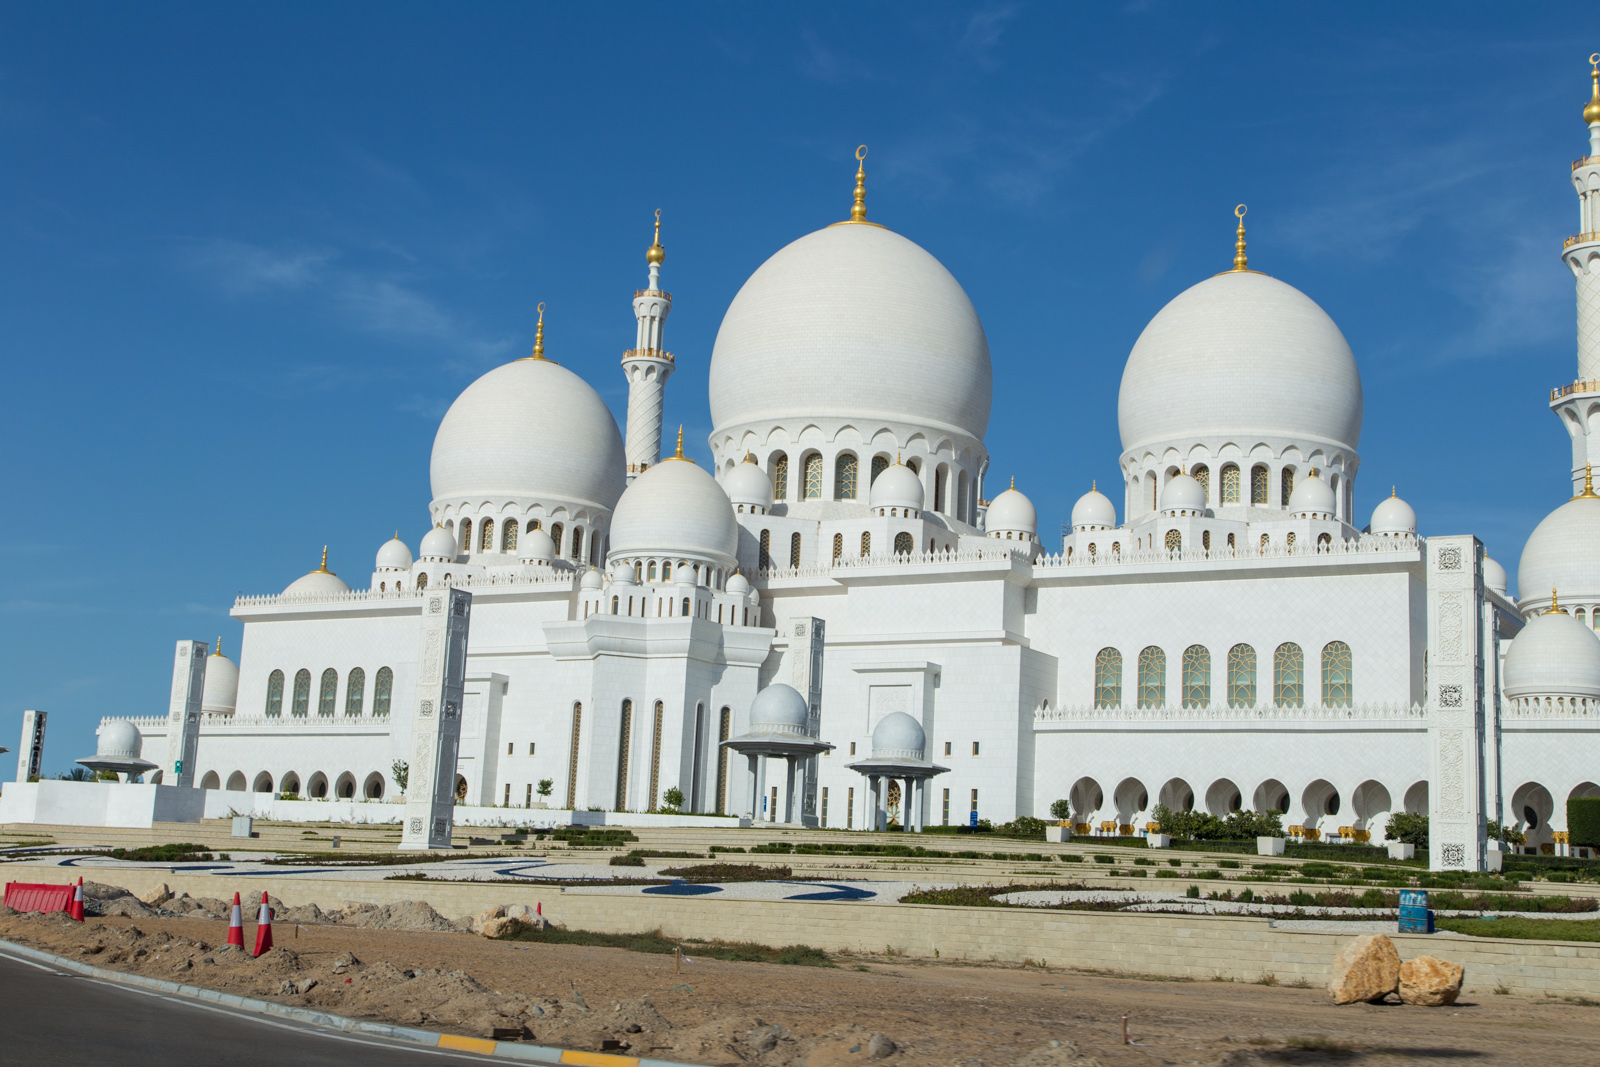 Day 3: A day in Abu Dhabi (including Grand Mosque, Masdar City and others…)